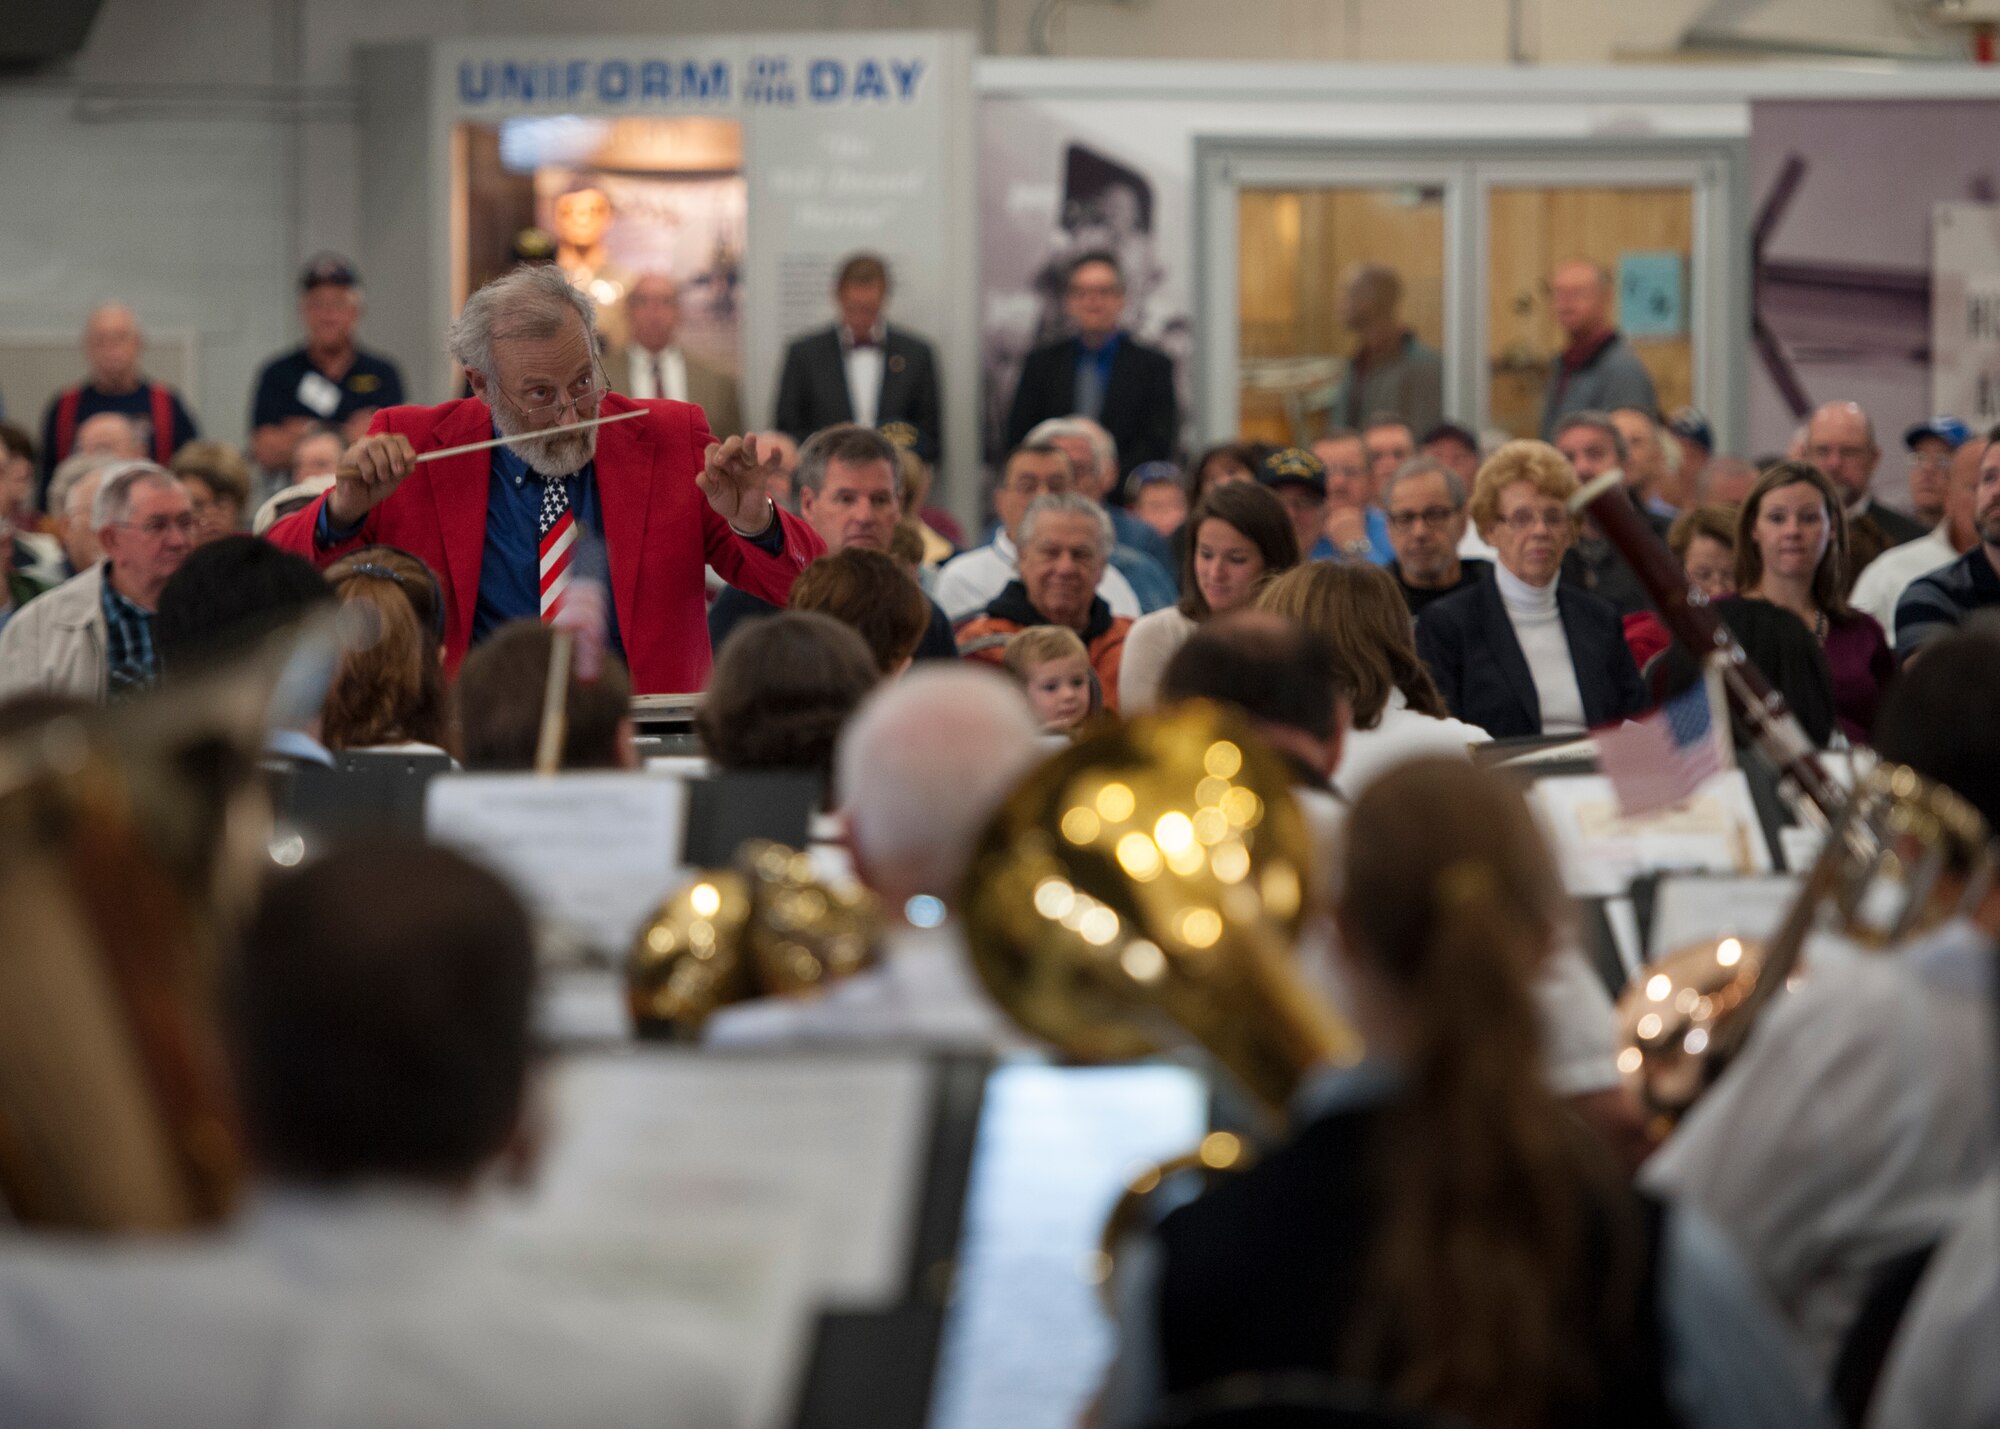 The Milford Community Band, from Milford, Del., performs at a Veterans Day Celebration Nov. 11, 2014, at the Air Mobility Command Museum, on Dover Air Force Base, Del. The band performed the “Star Spangled Banner,” and many other songs during the celebration. (U.S. Air Force photo/Airman 1st Class Zachary Cacicia)